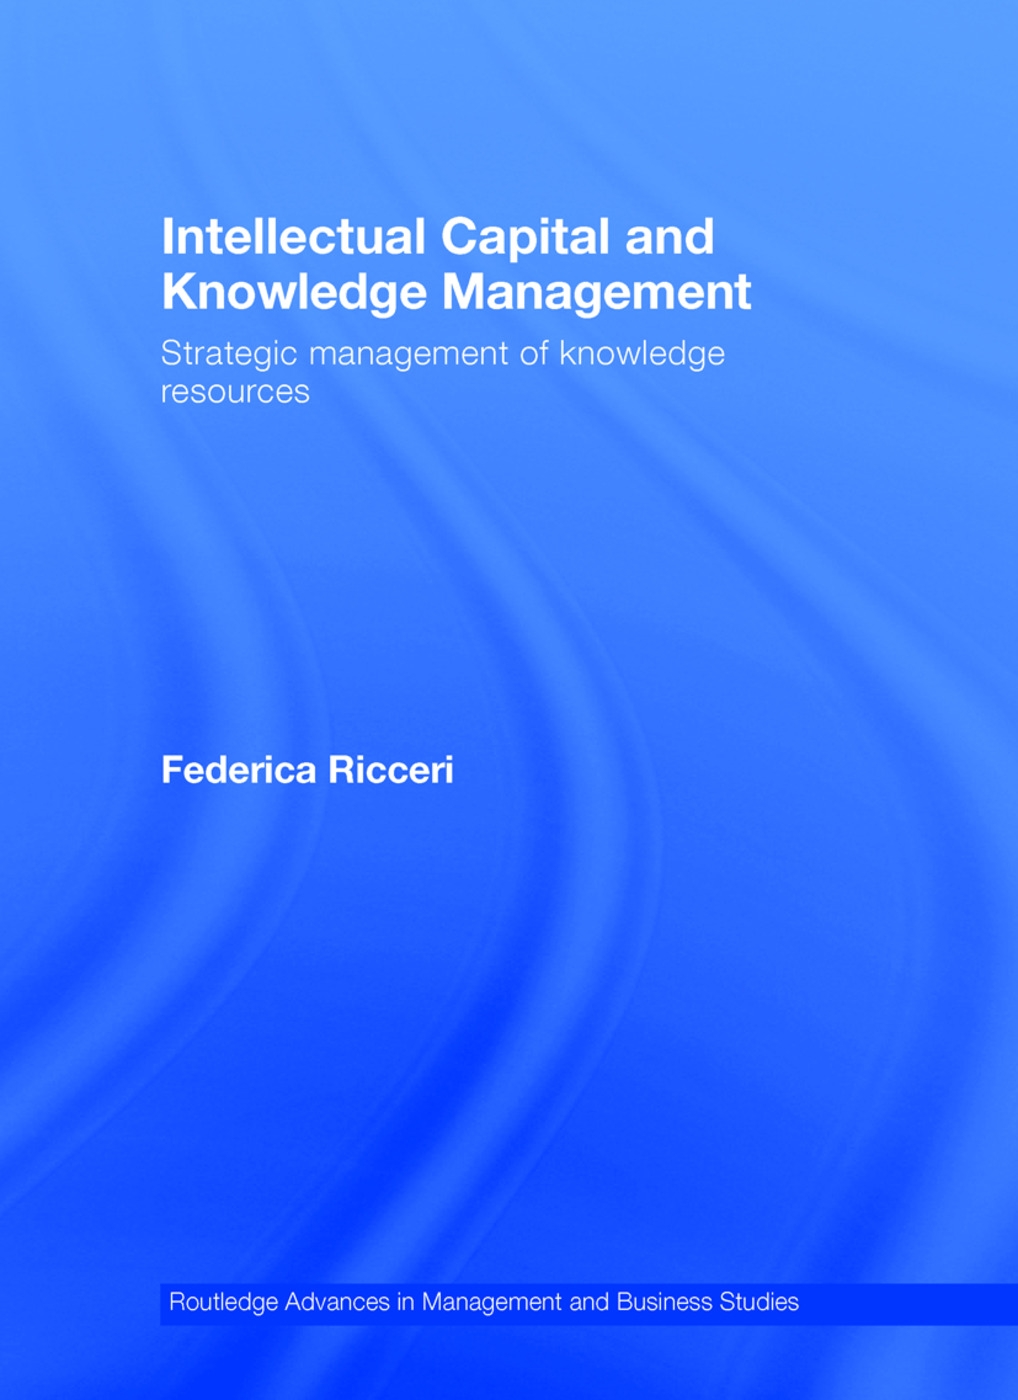 Intellectual Capital and Knowledge Management: Strategic Management of Knowledge Resources